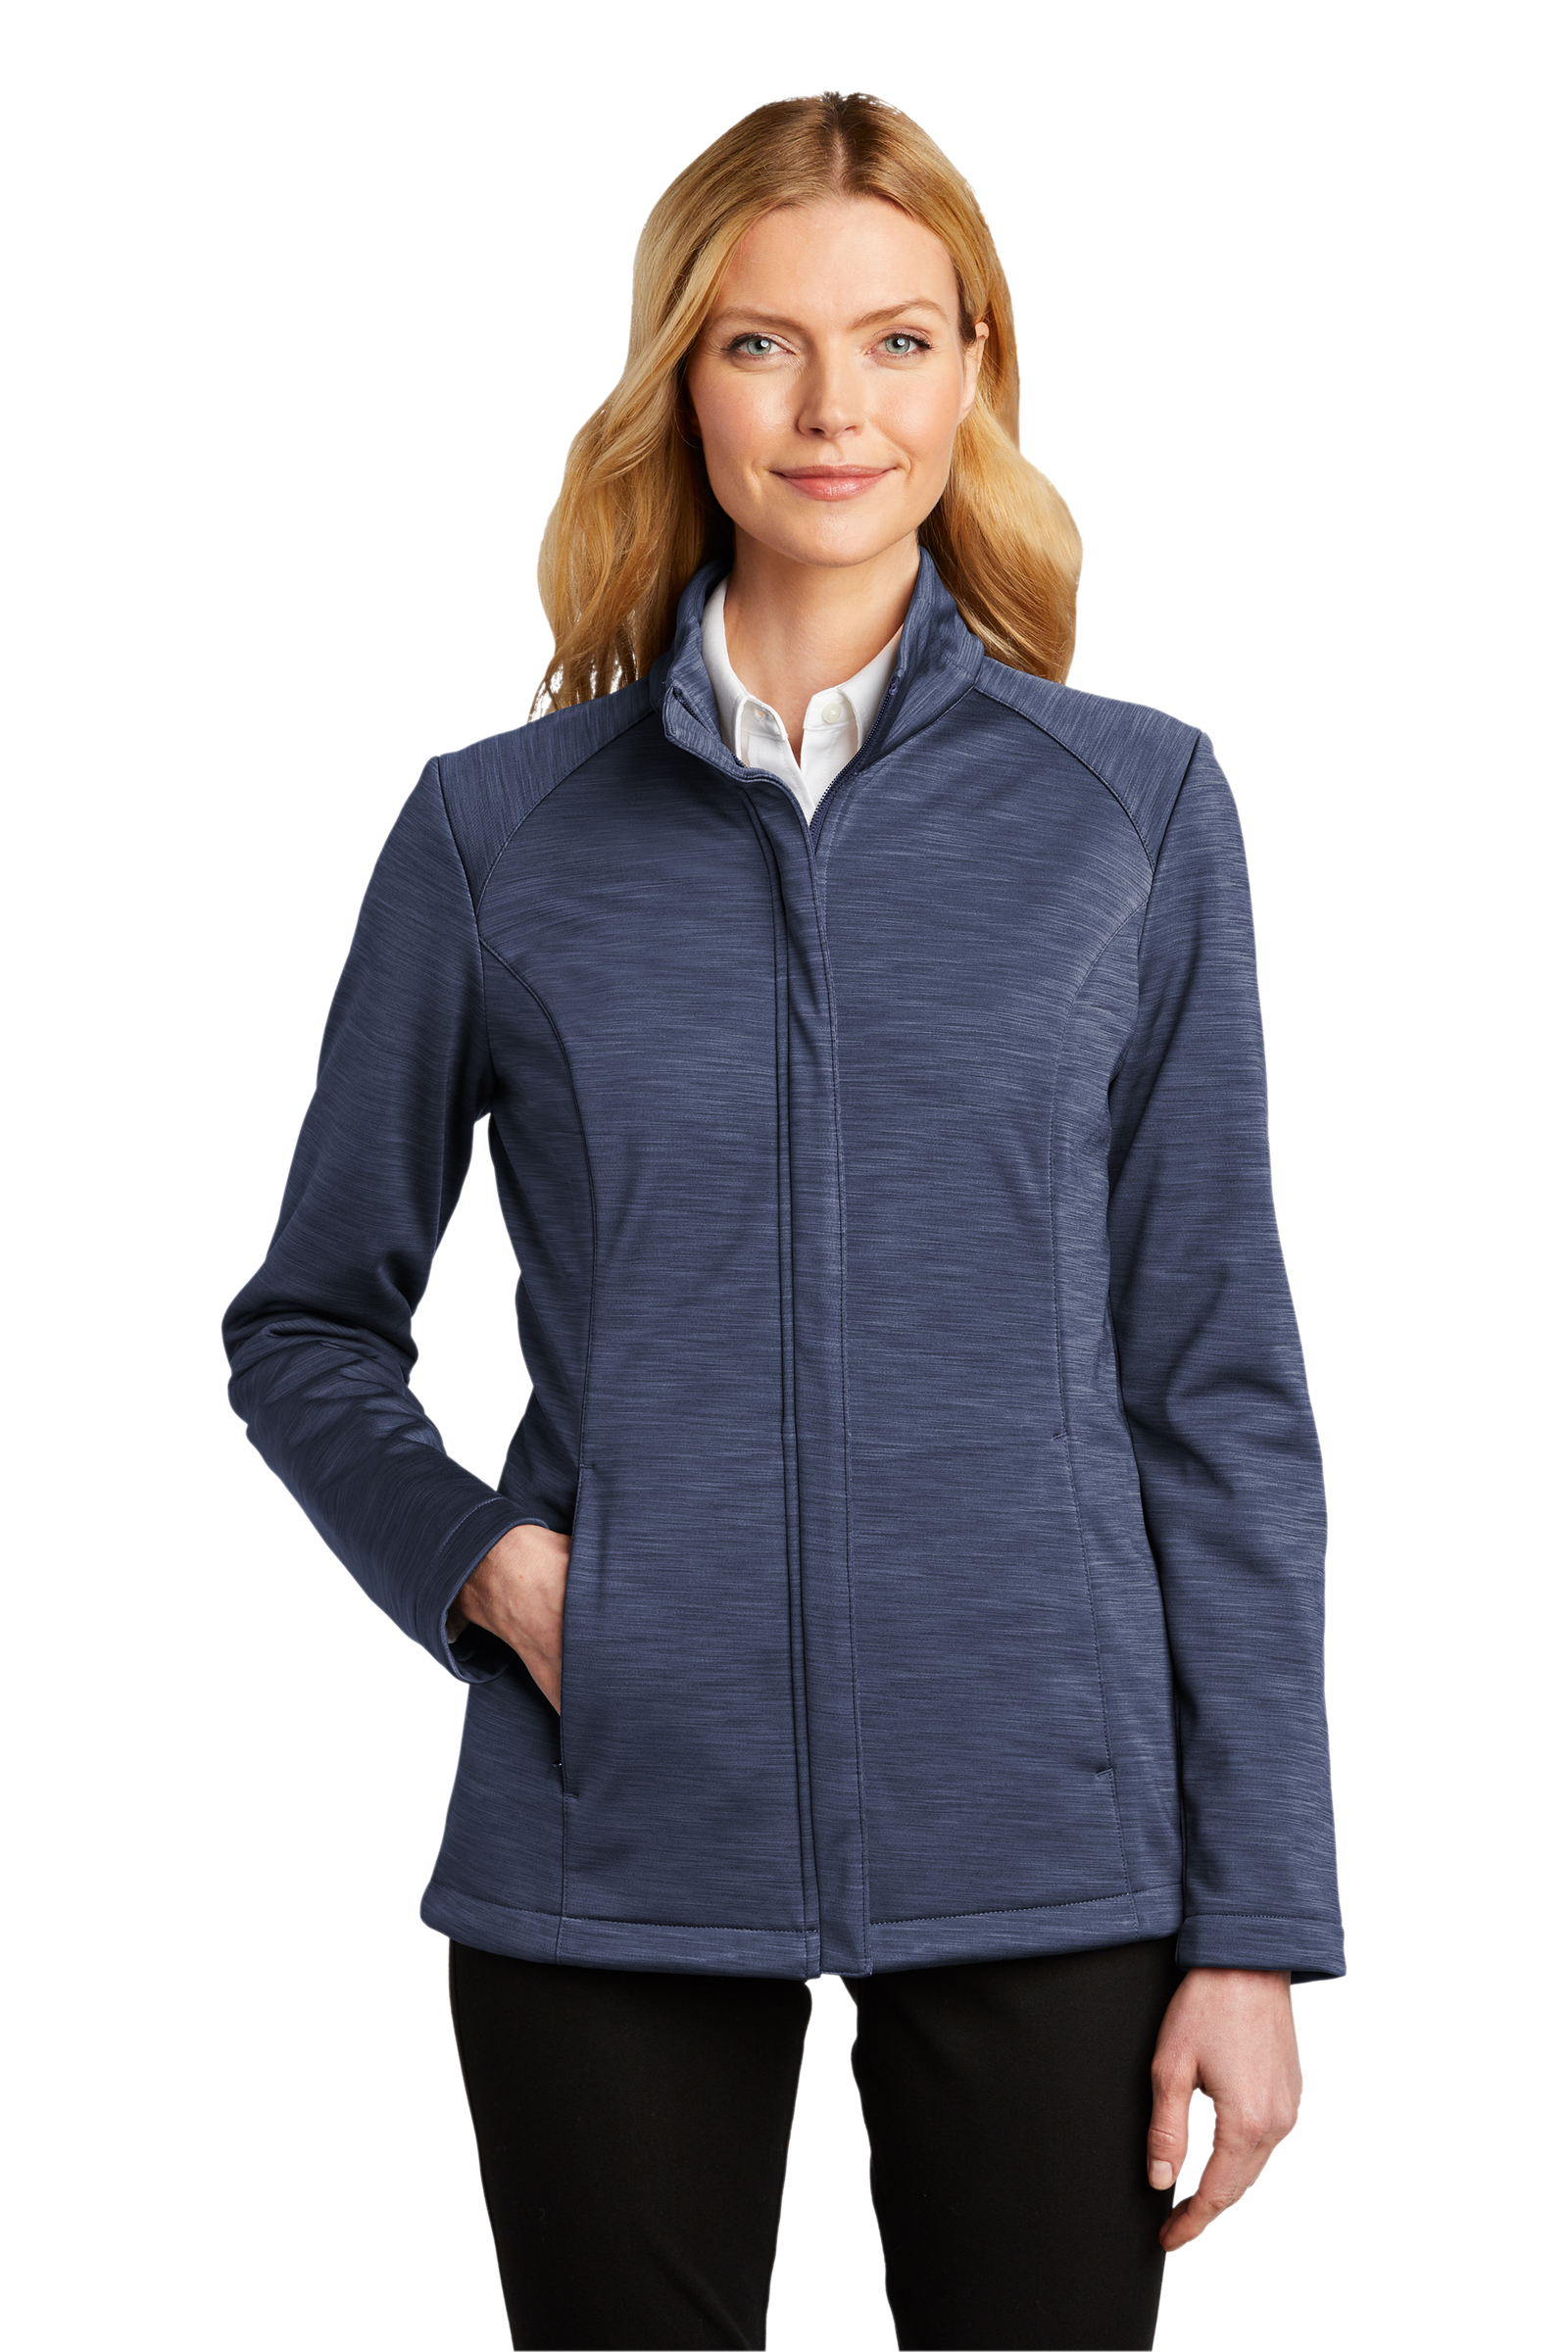 Port Authority Embroidered Women's Stream Soft Shell Jacket